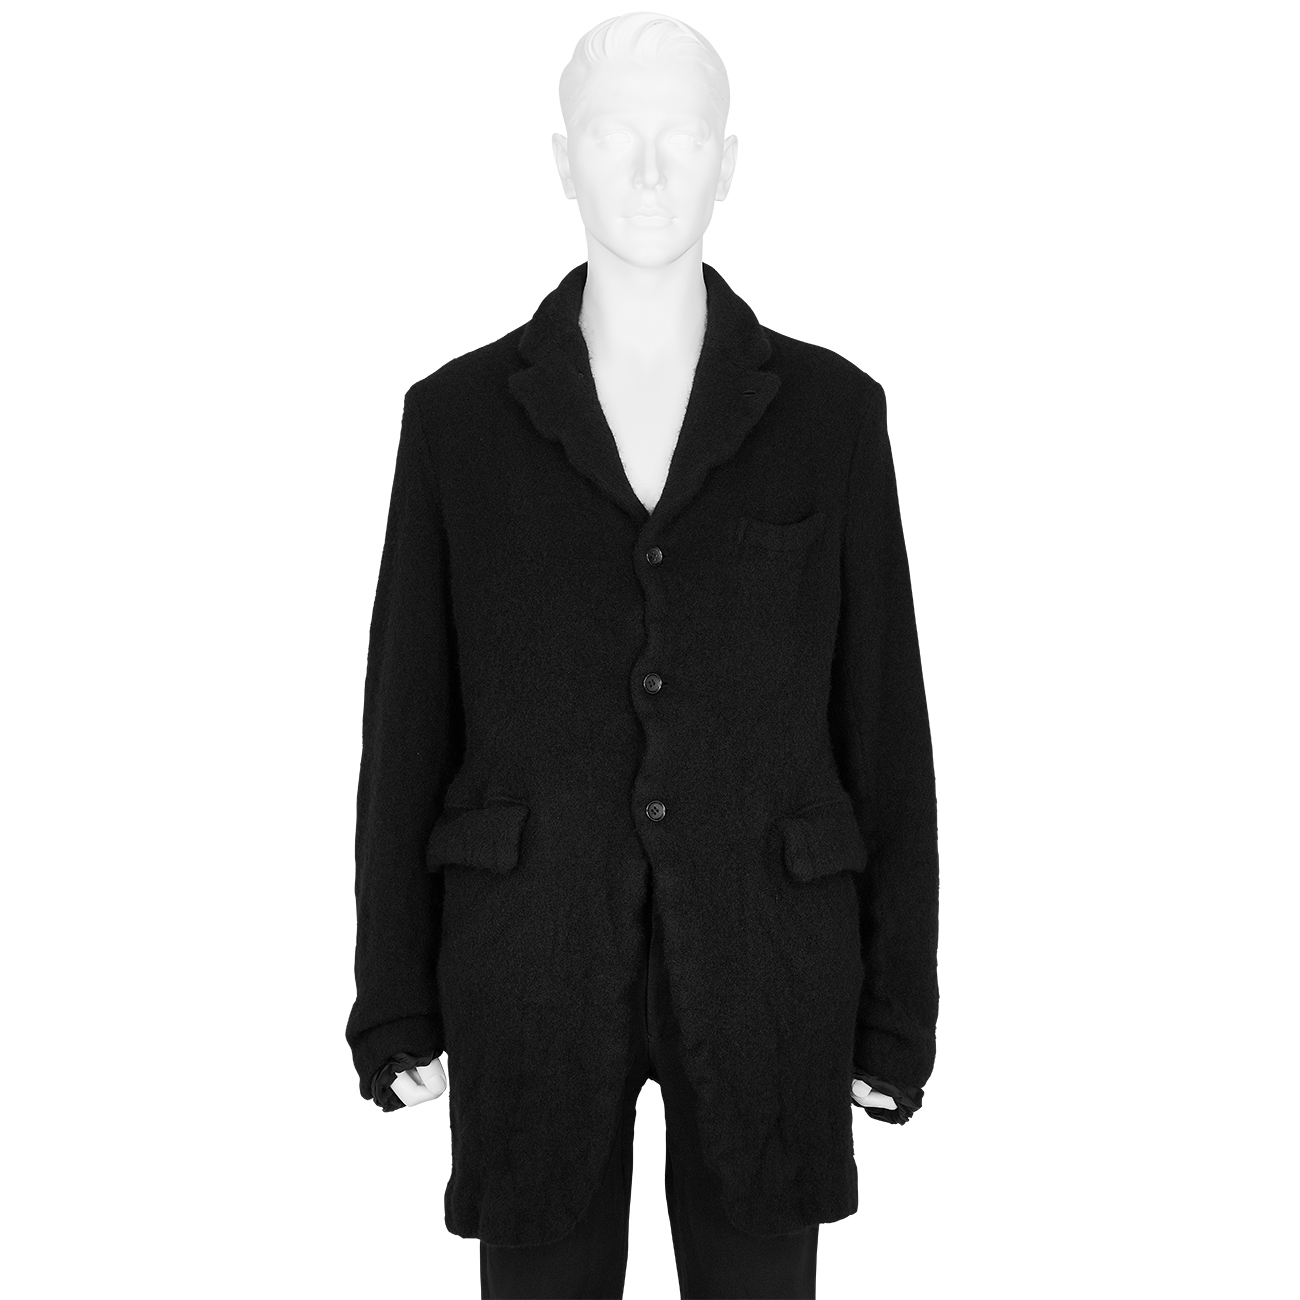 FULLING WOOL JACKET WITH 3 BUTTON BLACK - COMME des GARCONS HOMME